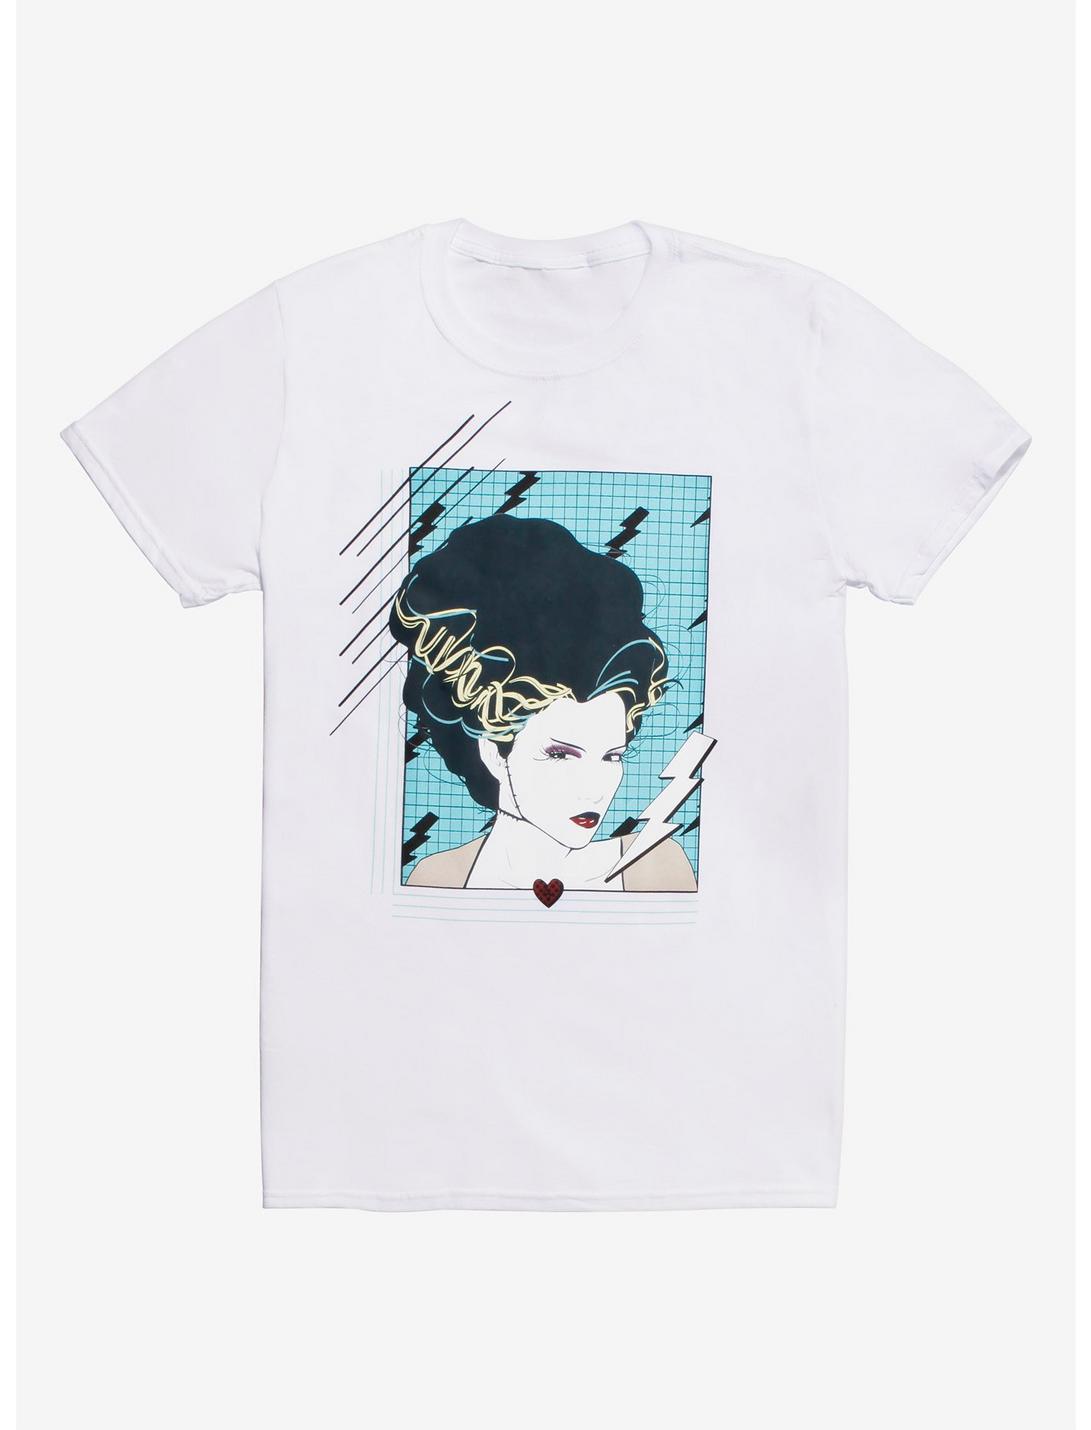 Universal Monsters Bride Of Frankenstein 80s Fashion Bride T-Shirt Hot Topic Exclusive, WHITE, hi-res